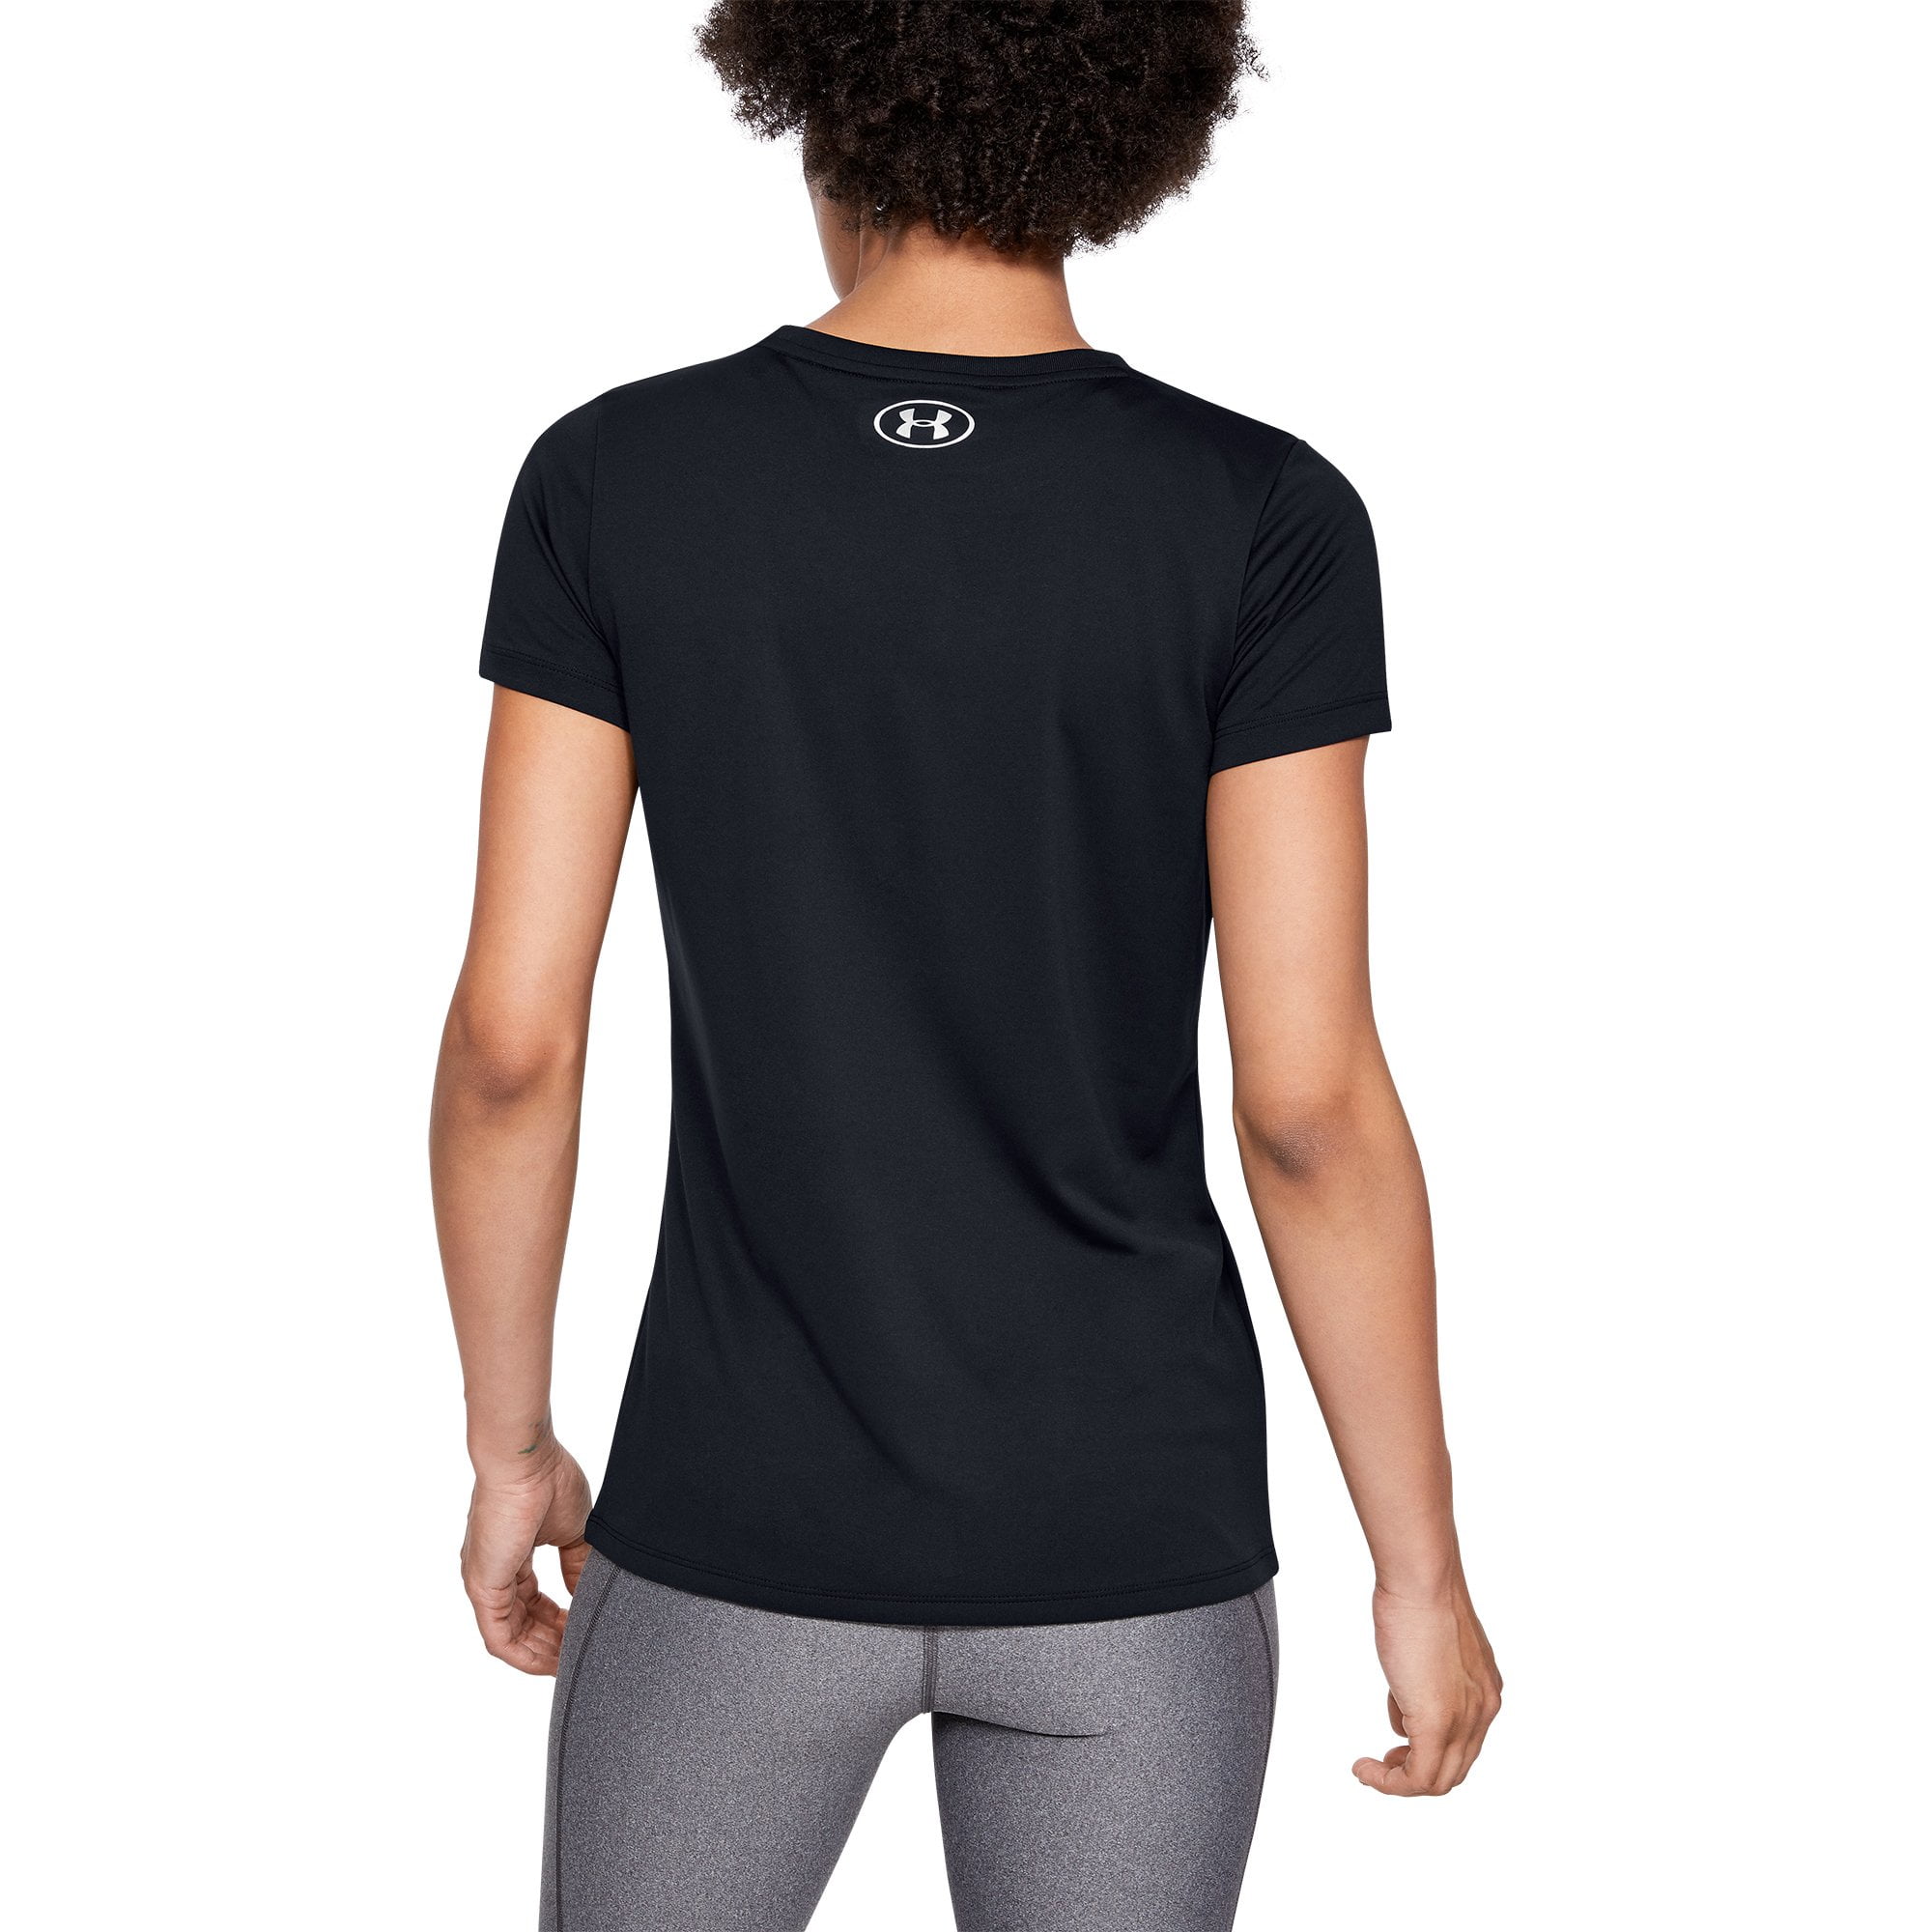 Under Armour Womens Stretch Short Sleeves Shirts & Tops Black S 